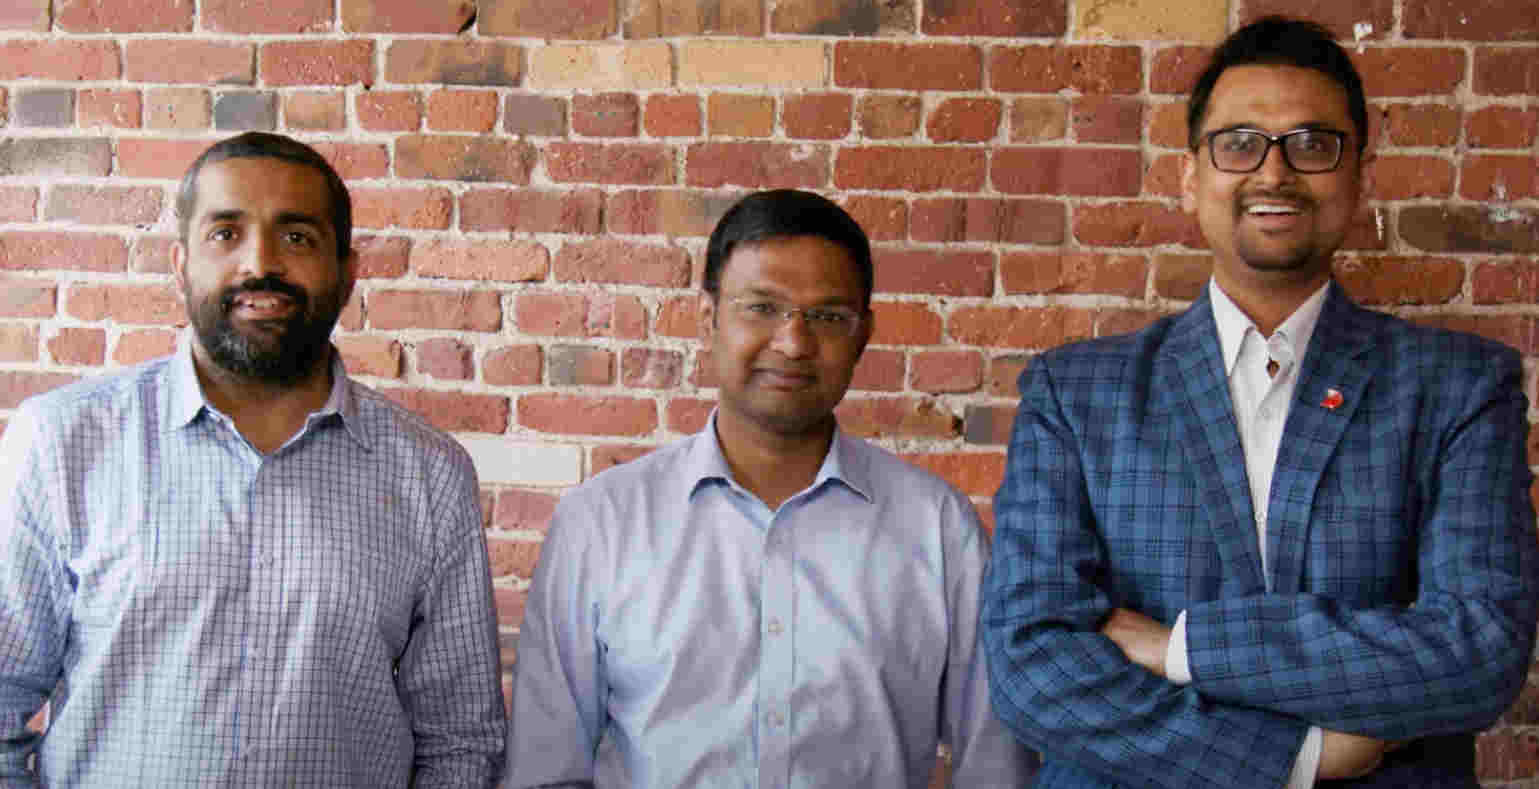 Big data startup Innovaccer nabs $150M, catapults to $3.2B valuation